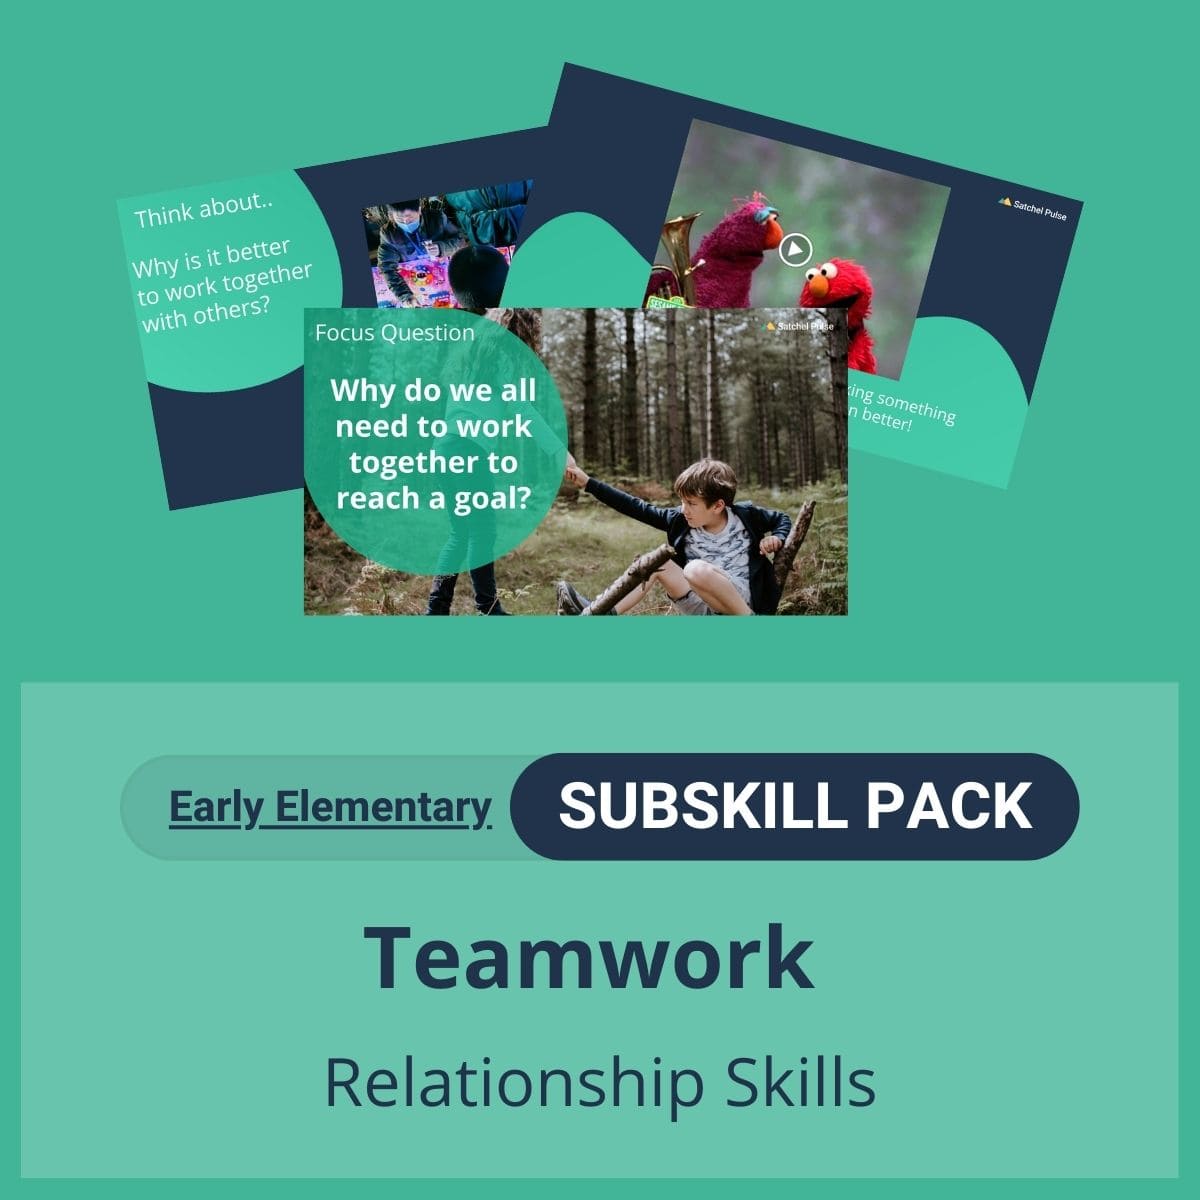 SEL Resource pack with social-emotional learning lessons and self-studies to help you teach Teamwork in your classroom as a part of the SEL curriculum.